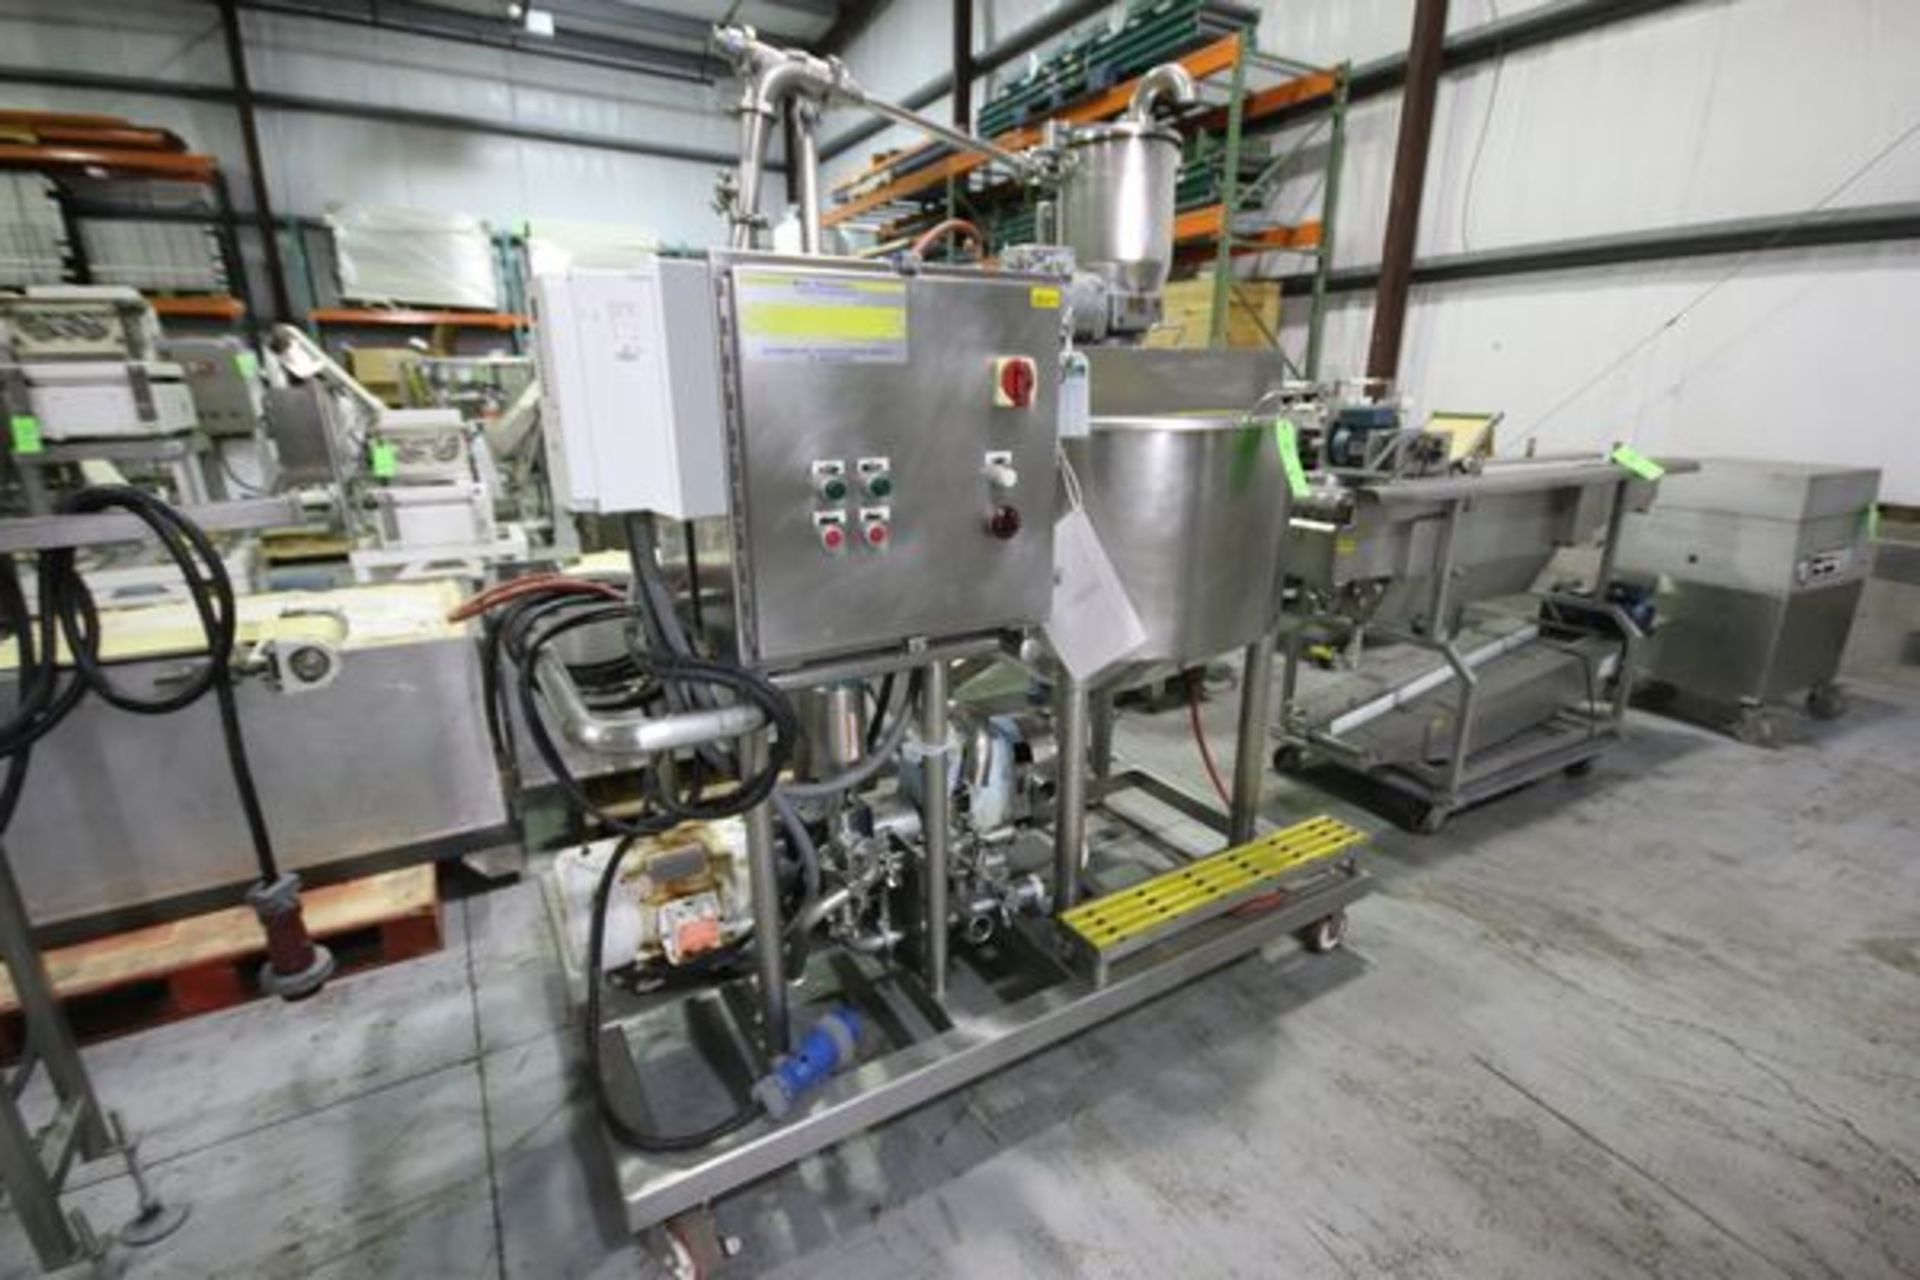 Chester-Jenson Aprox. 70 Gal. Processor Kettle, Model X70N2.5, S/N 9620-P, Built 1996, Rated 100 PSI - Image 2 of 8